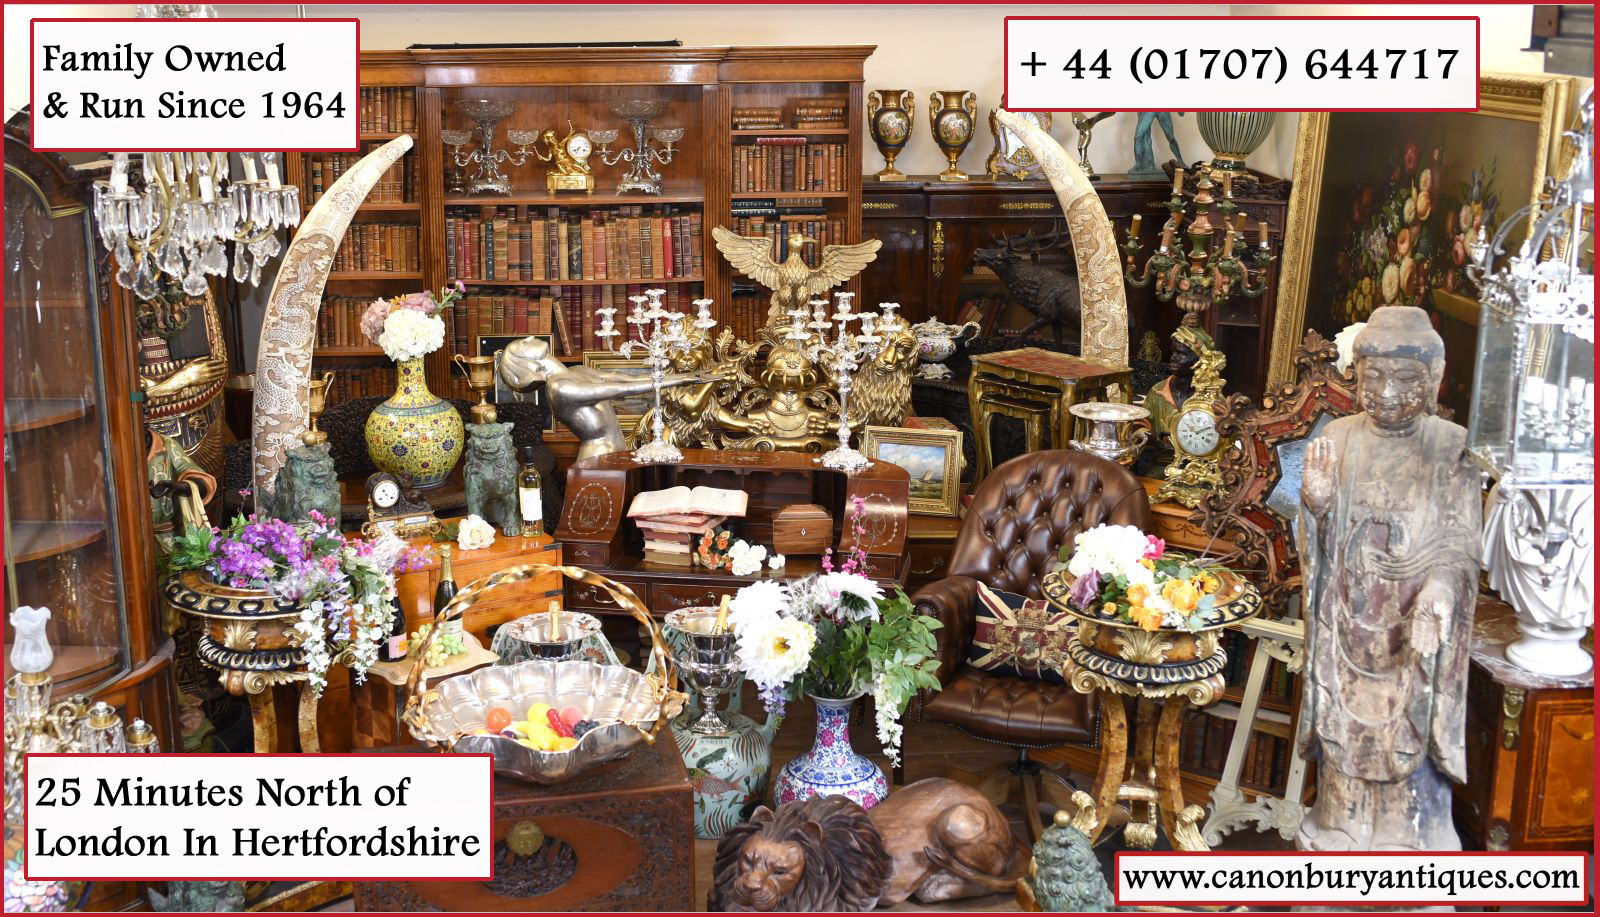 Large antiques warehouse in Hertfordshire